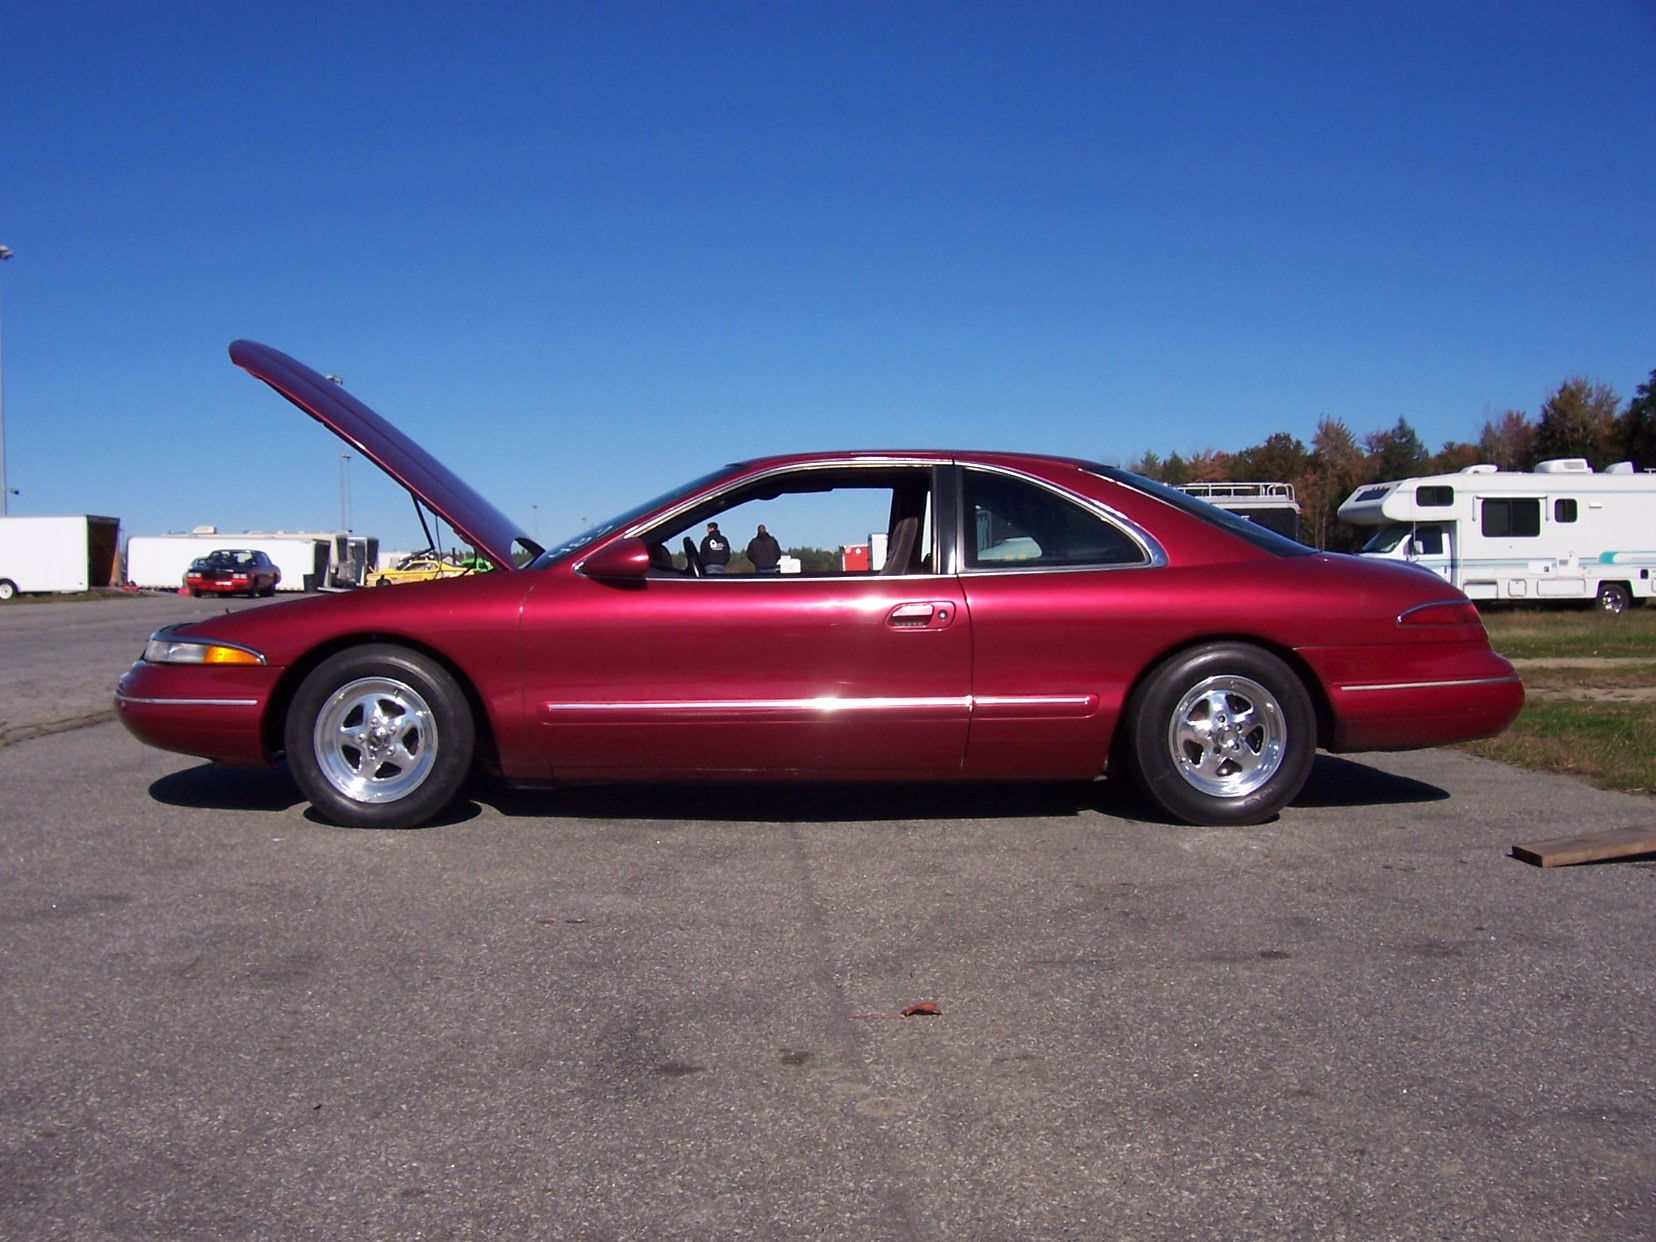 RED 1993 Lincoln Mark VIII 